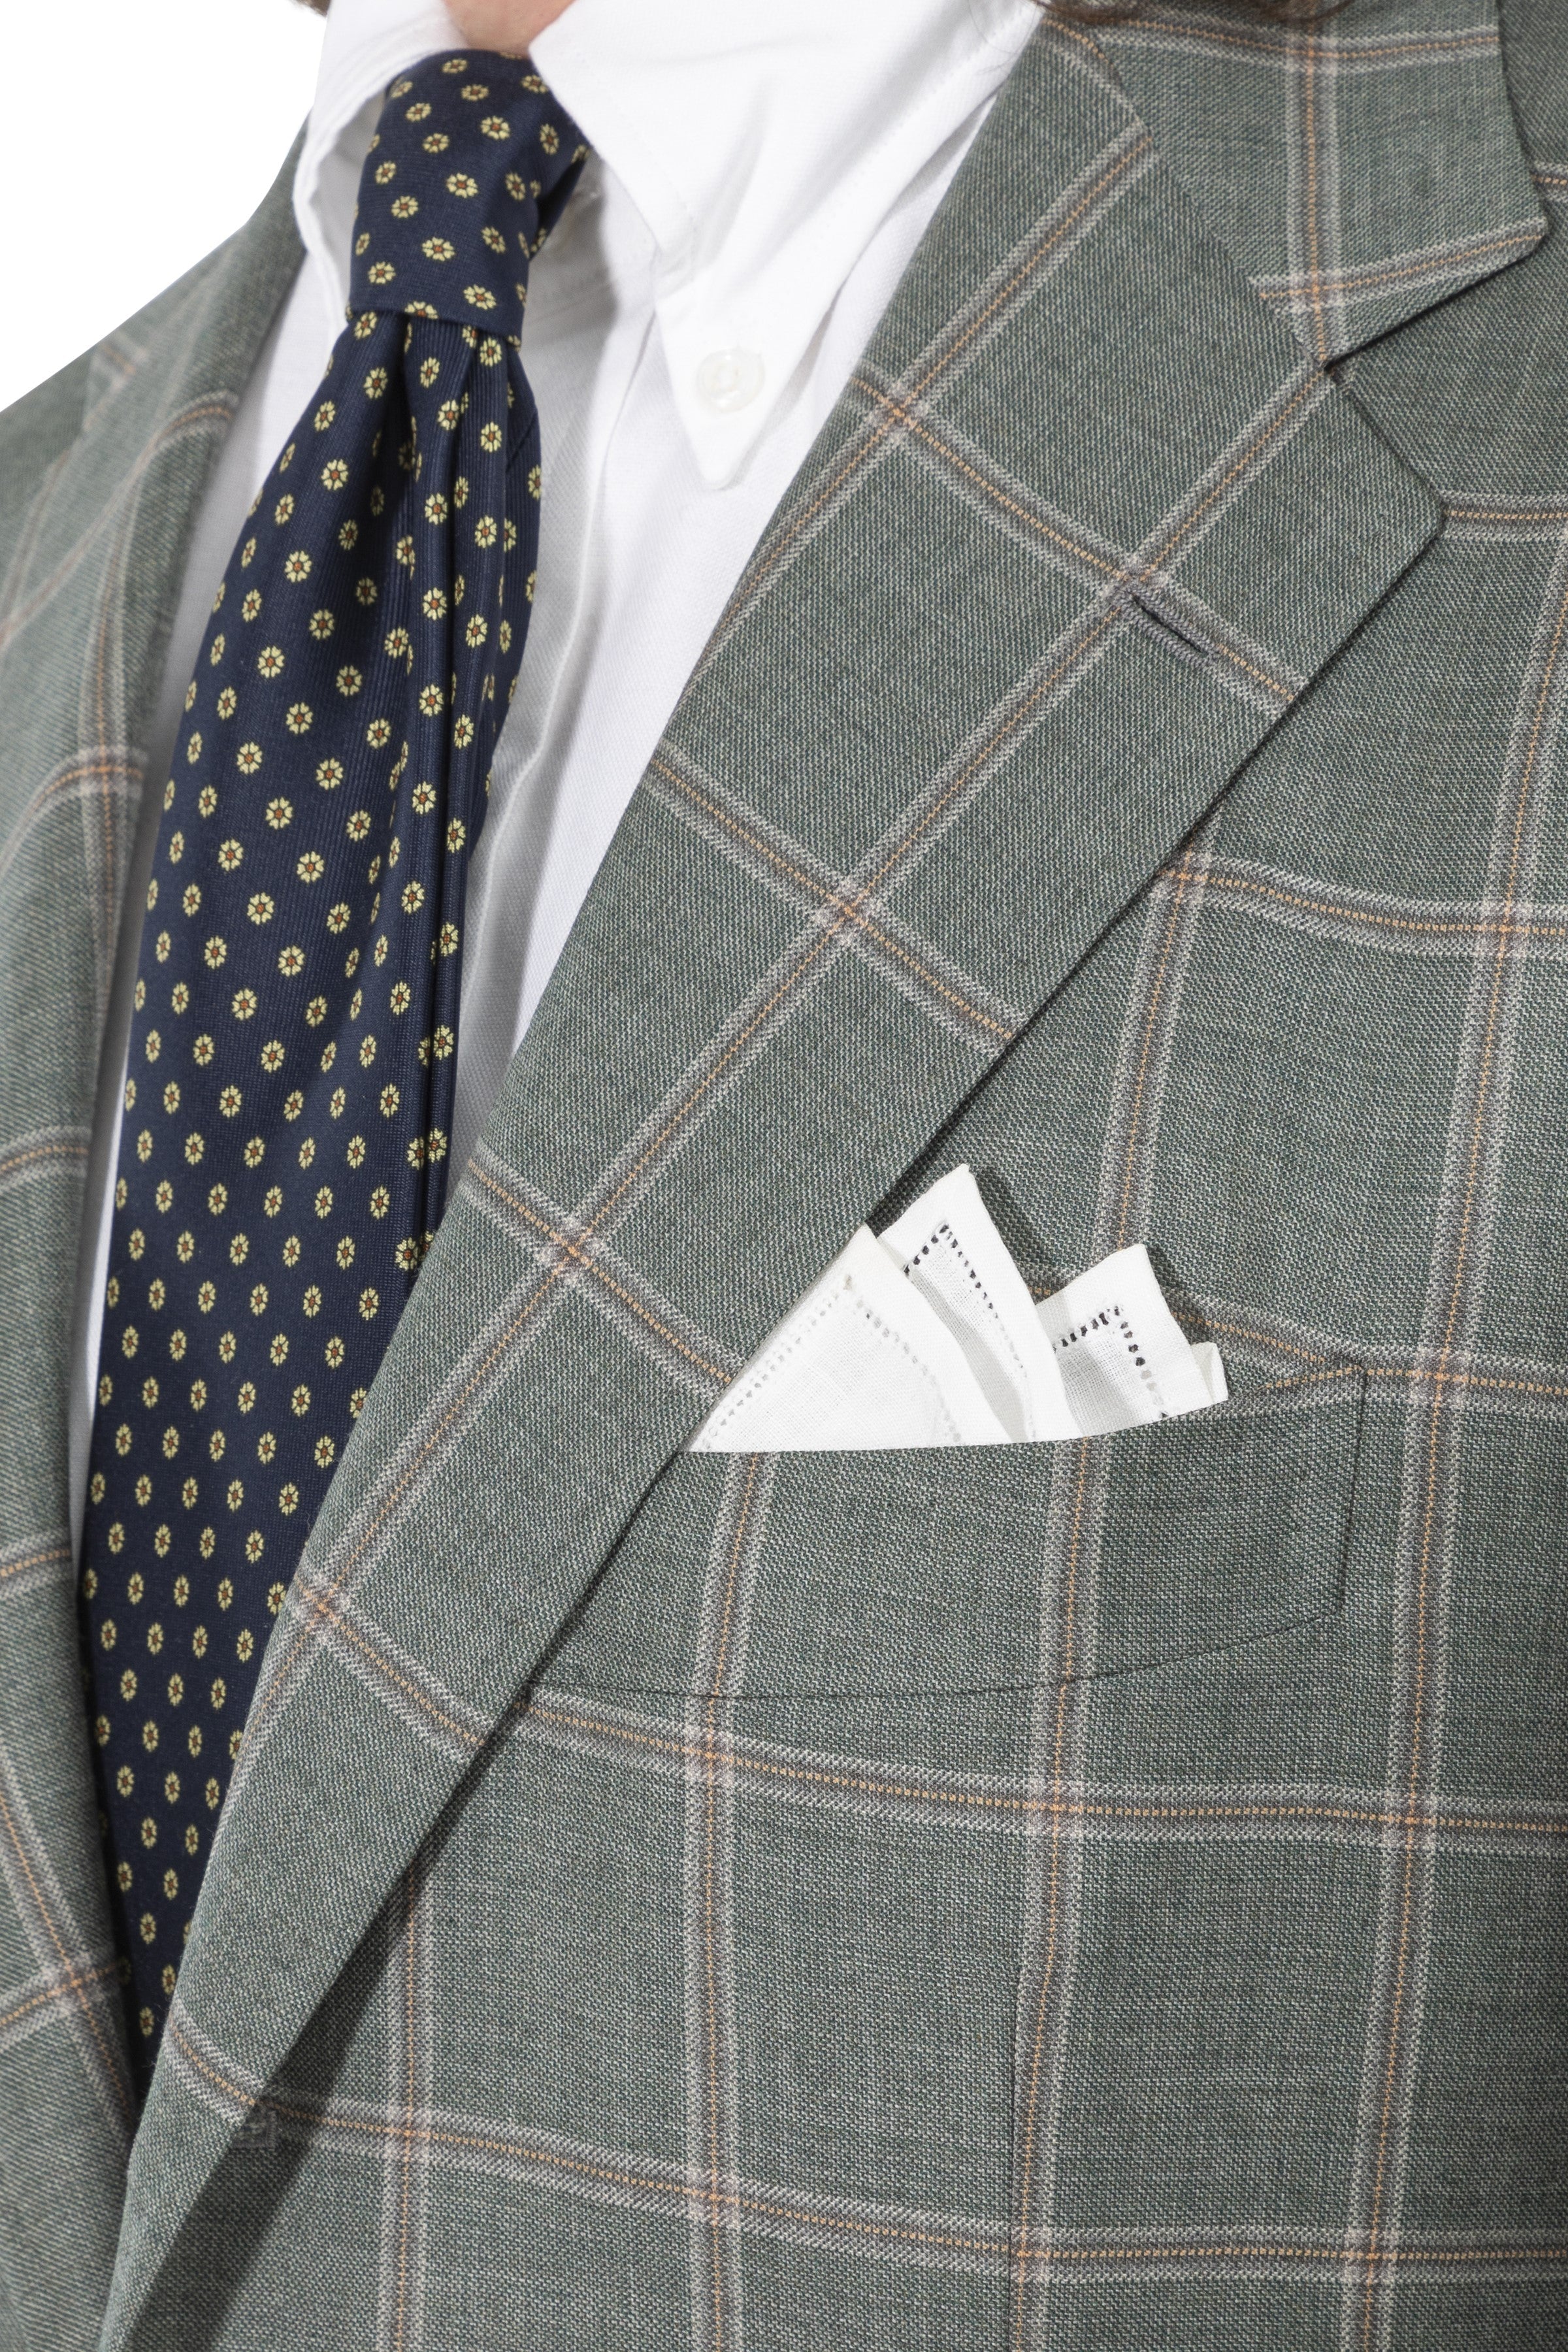 The Armoury by Ring Jacket Model 3 Green with White Peach Windowpane Wool Sport Coat